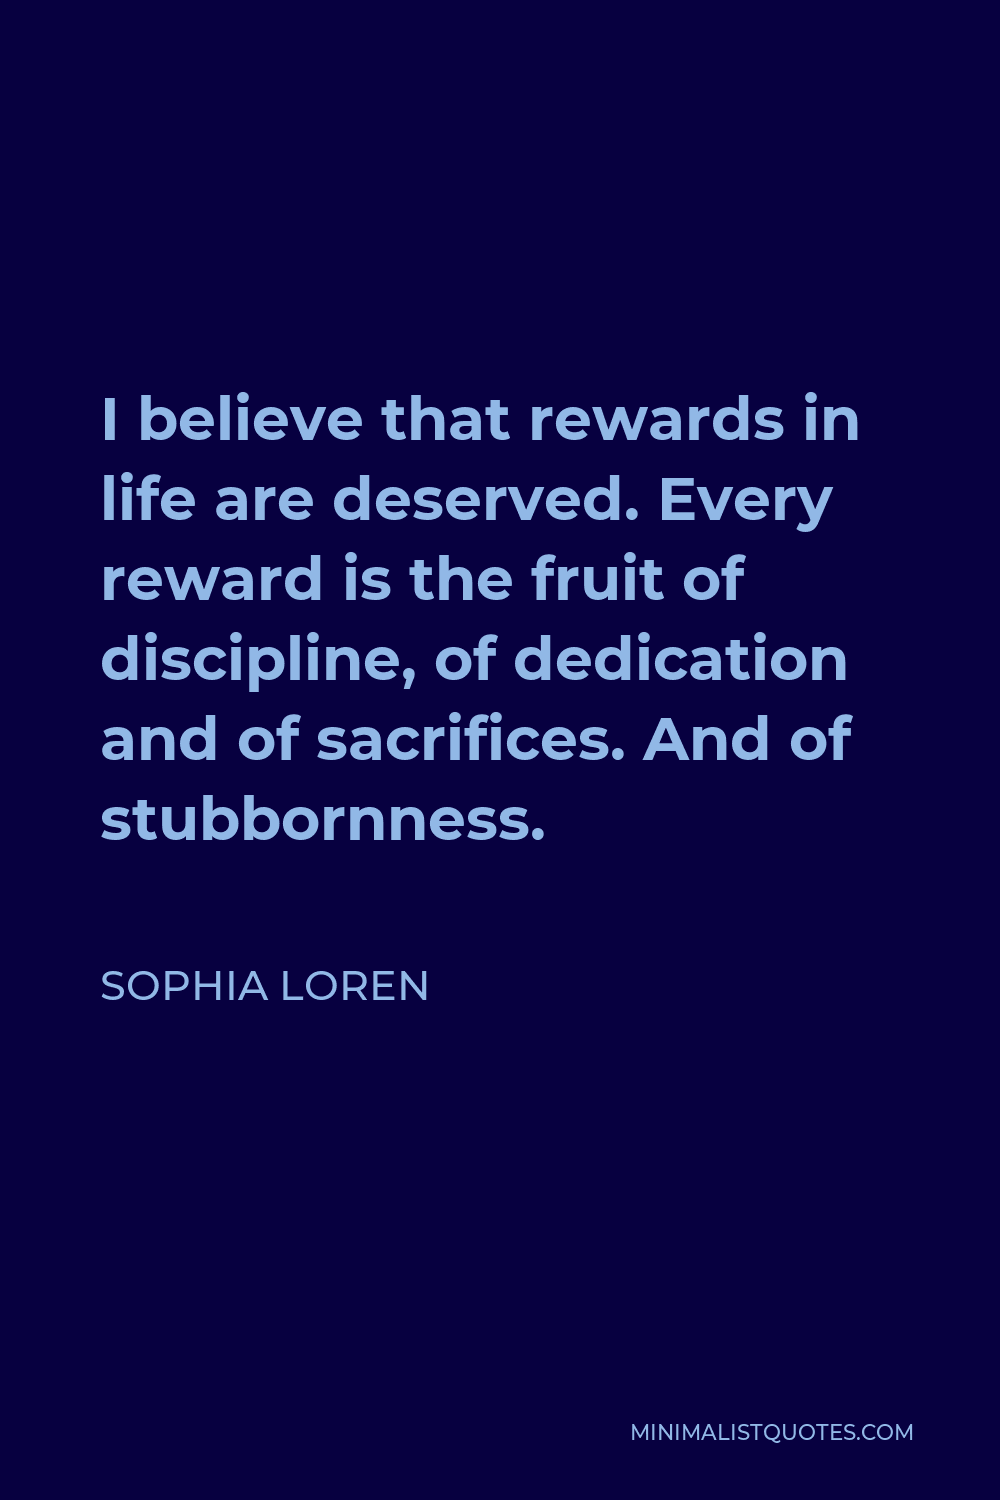 Sophia Loren Quote - I believe that rewards in life are deserved. Every reward is the fruit of discipline, of dedication and of sacrifices. And of stubbornness.